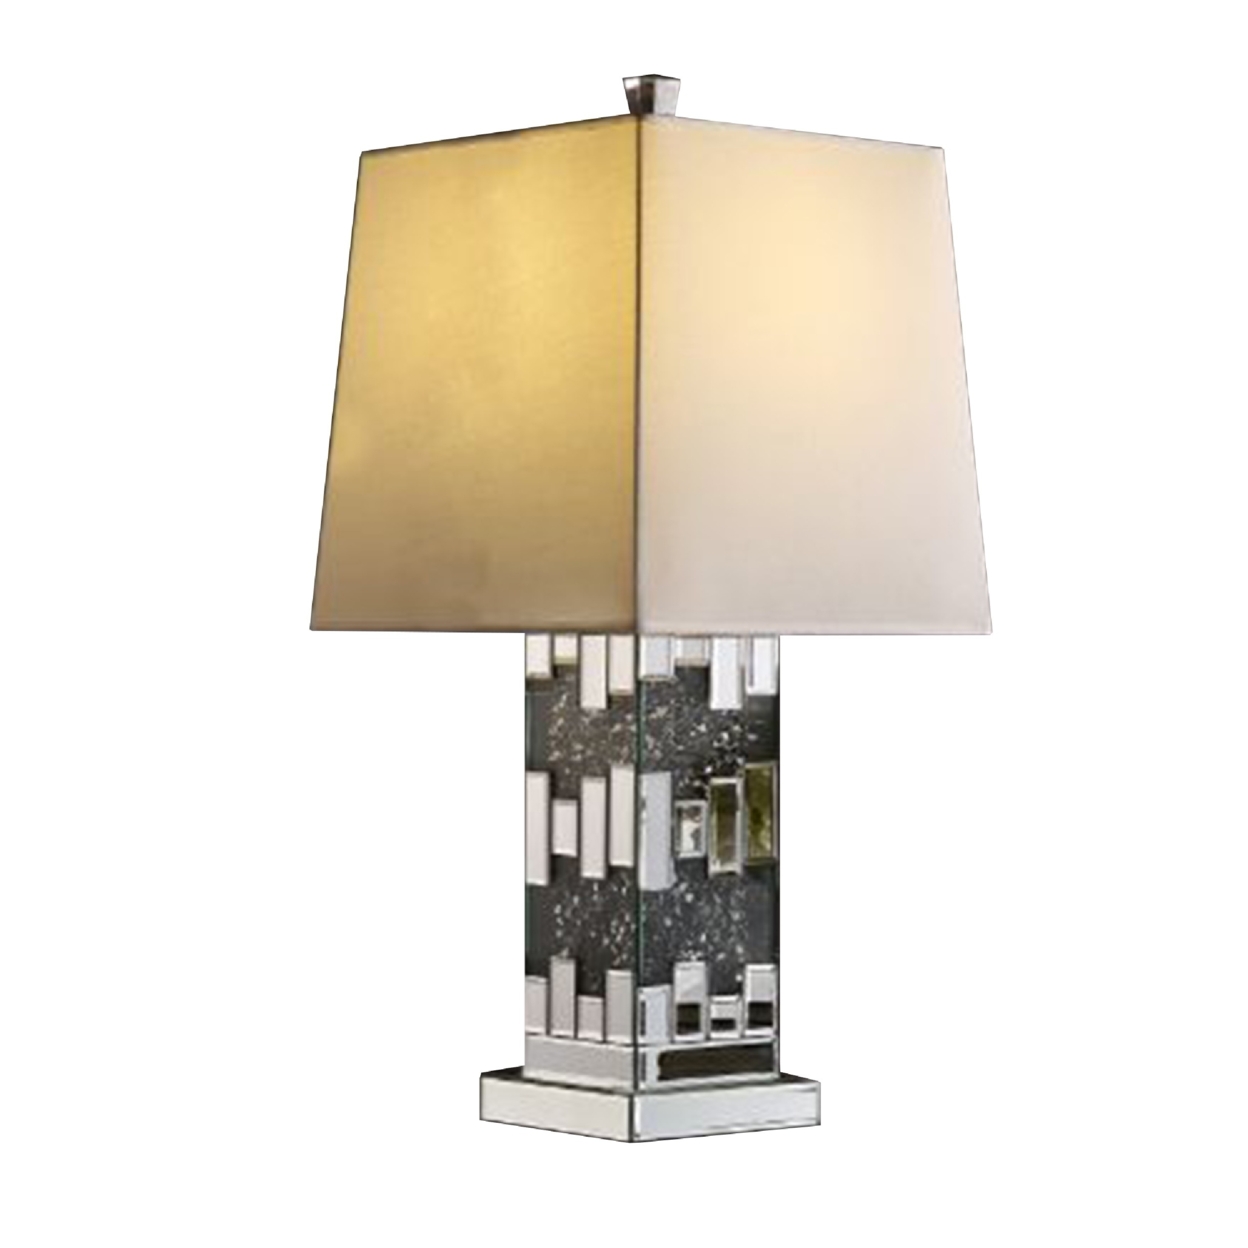 Table Lamp With Cuboid Shape And Mirrored Trim, Silver- Saltoro Sherpi